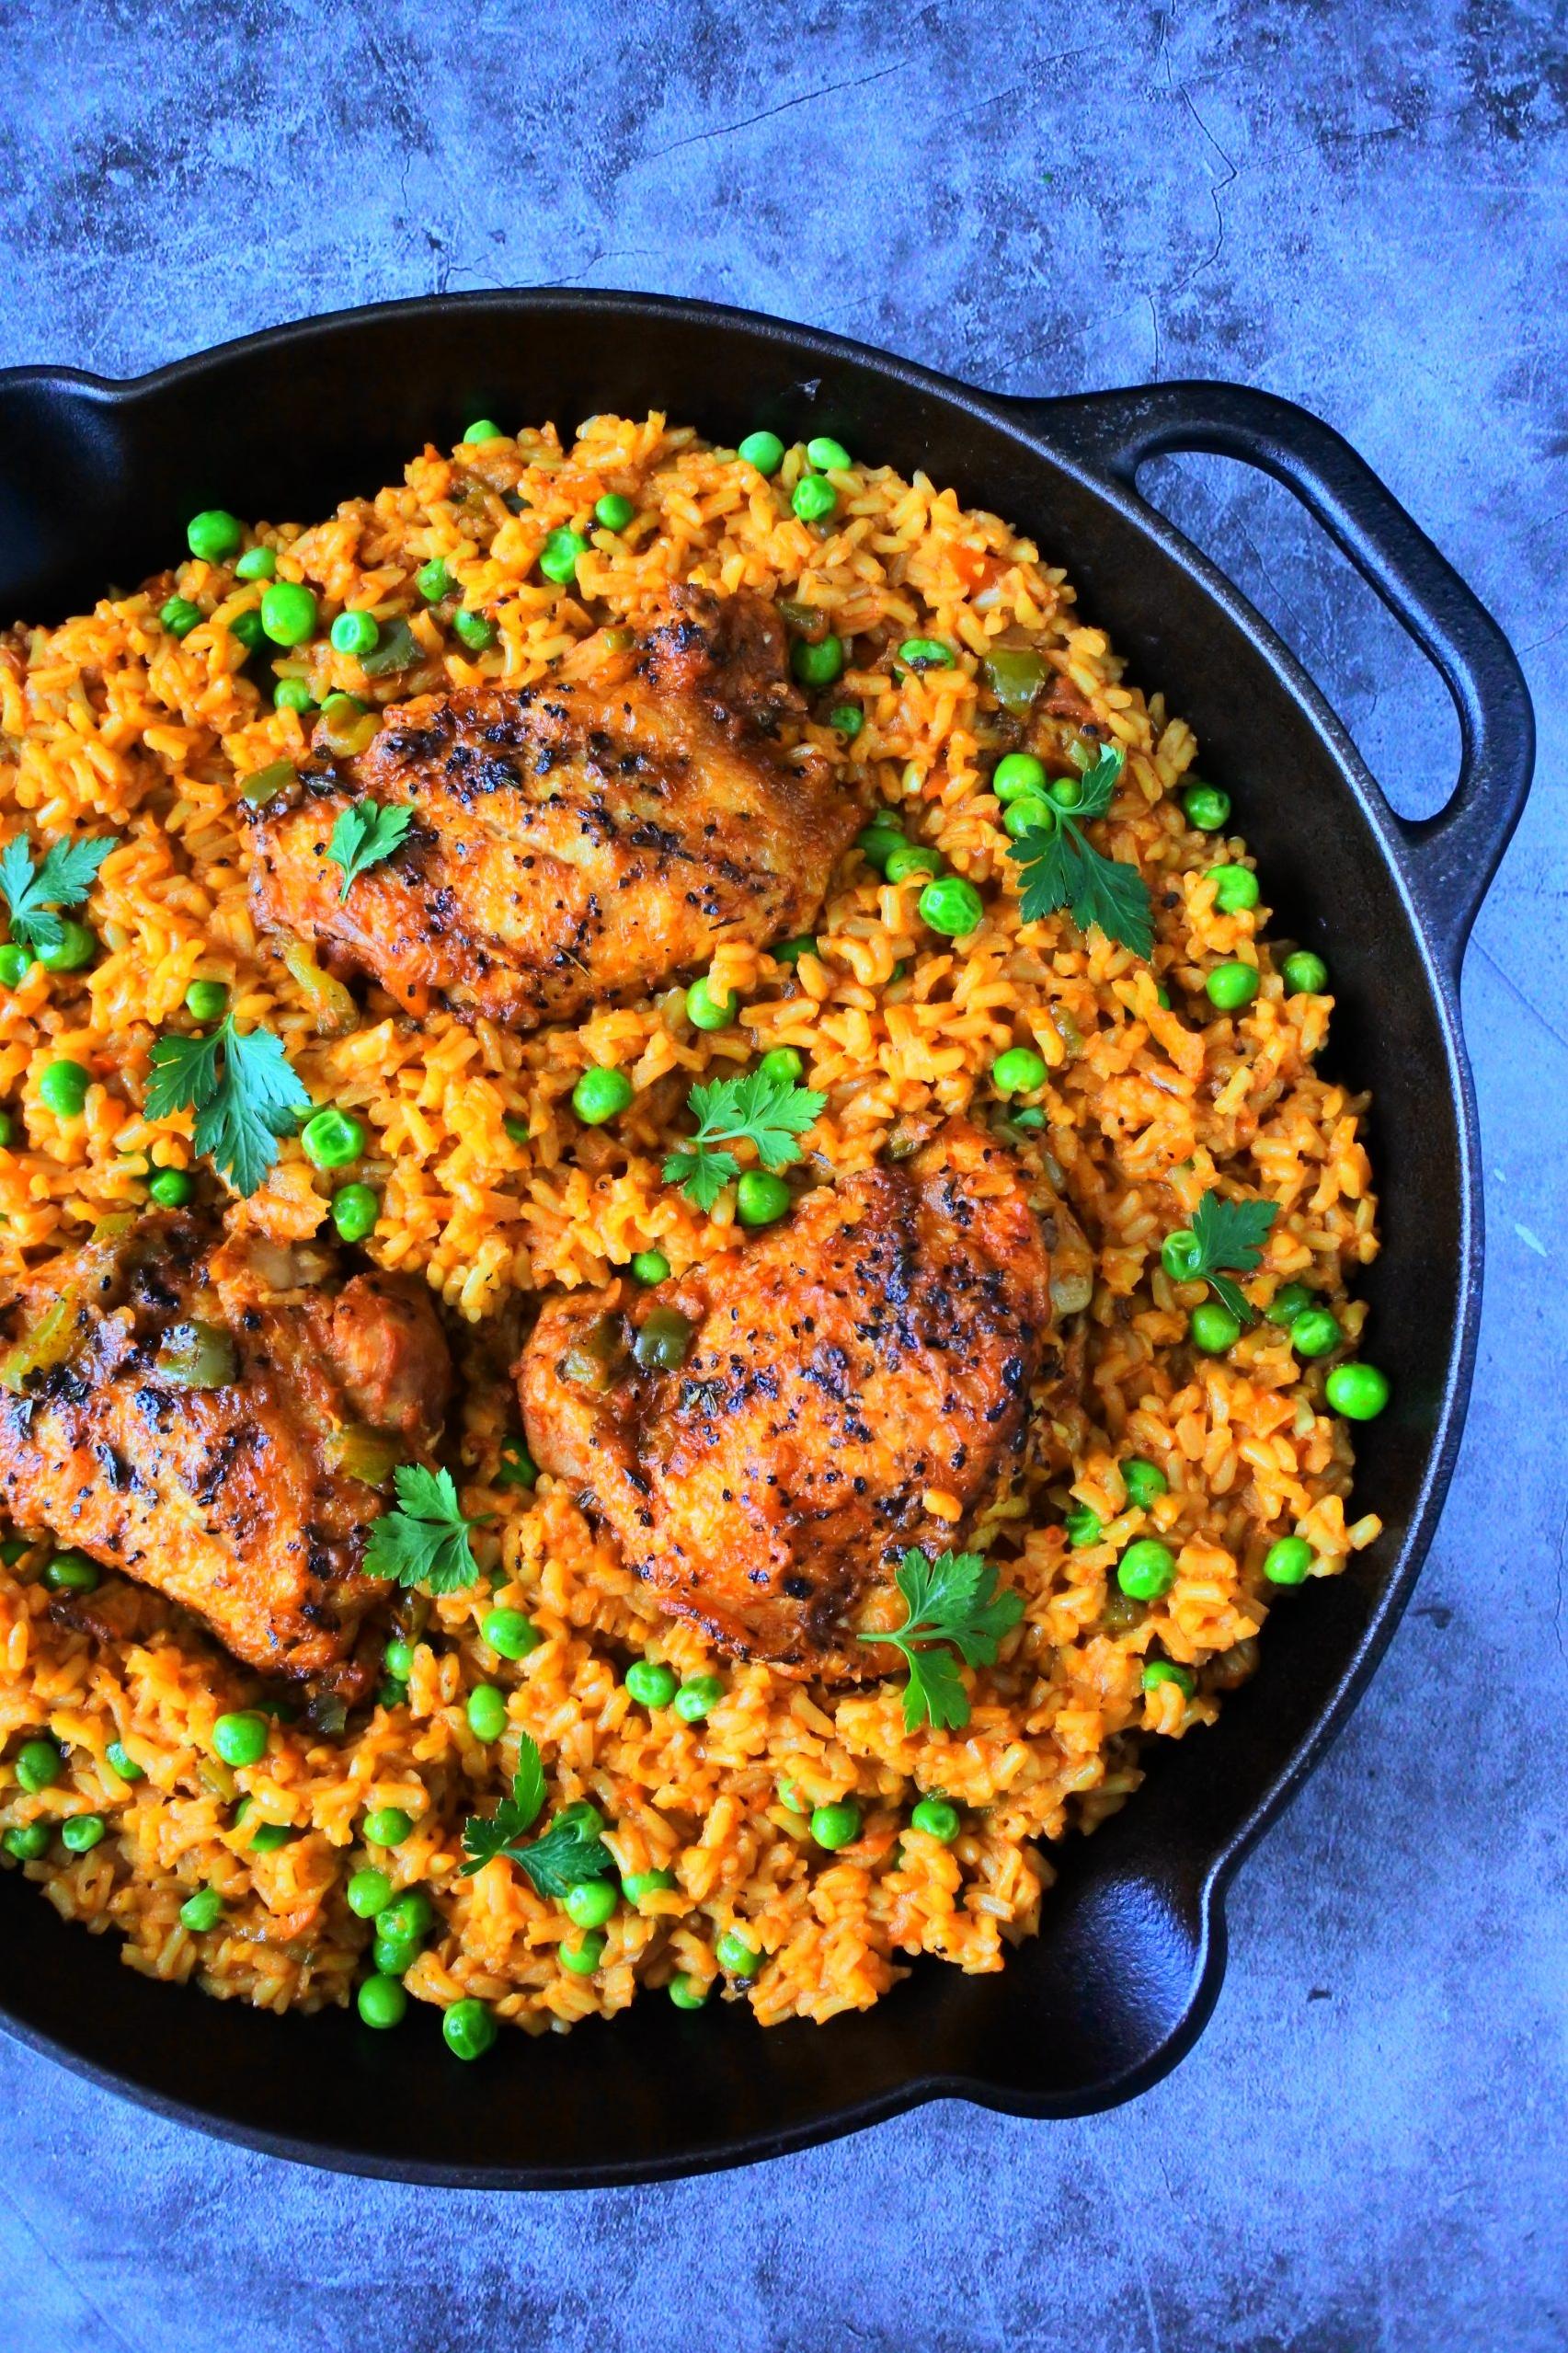  Juicy chicken, tender rice, and a blend of spices make this dish a winner.